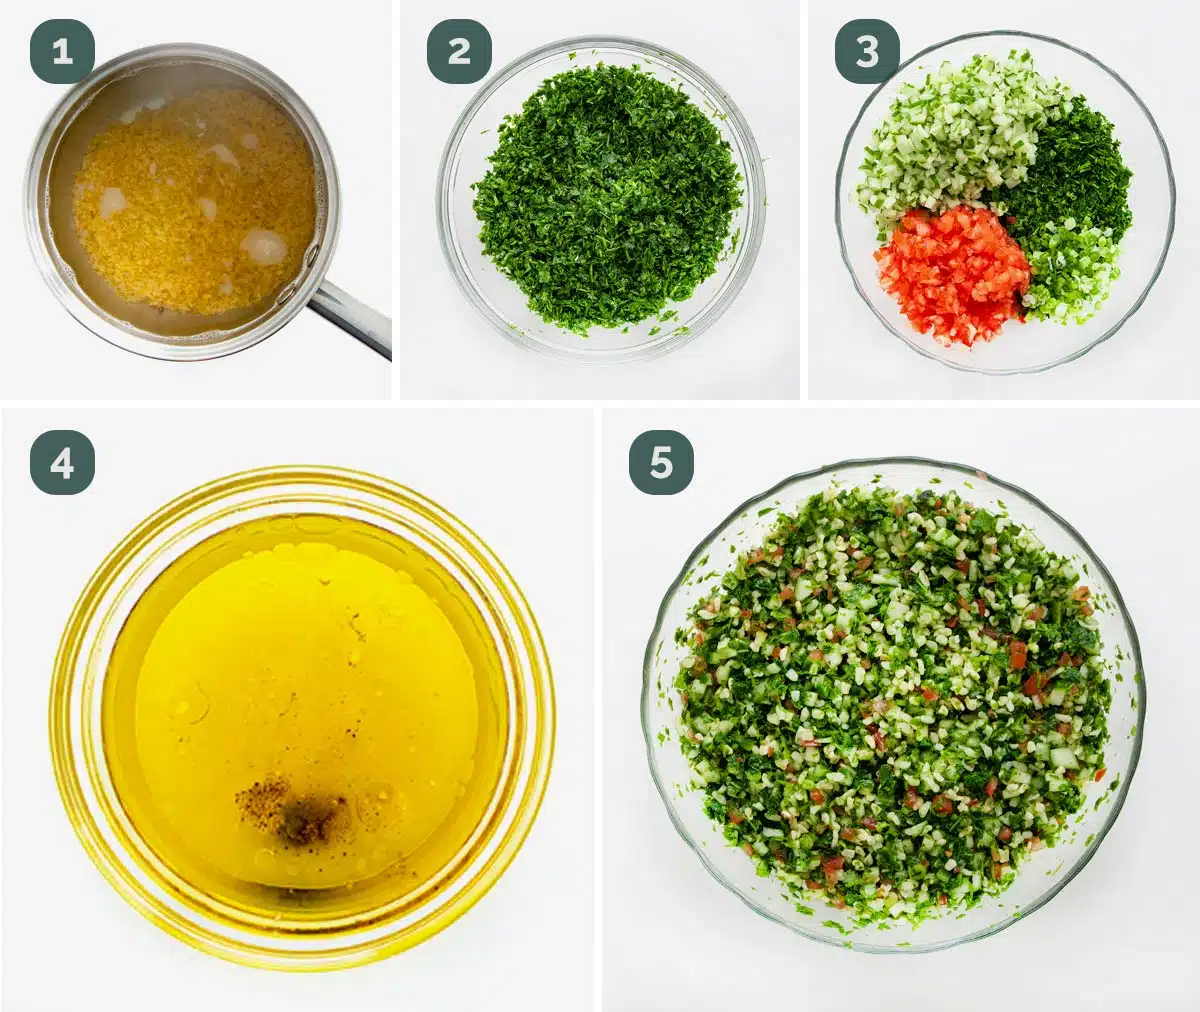 process shots showing how to make tabbouleh salad.